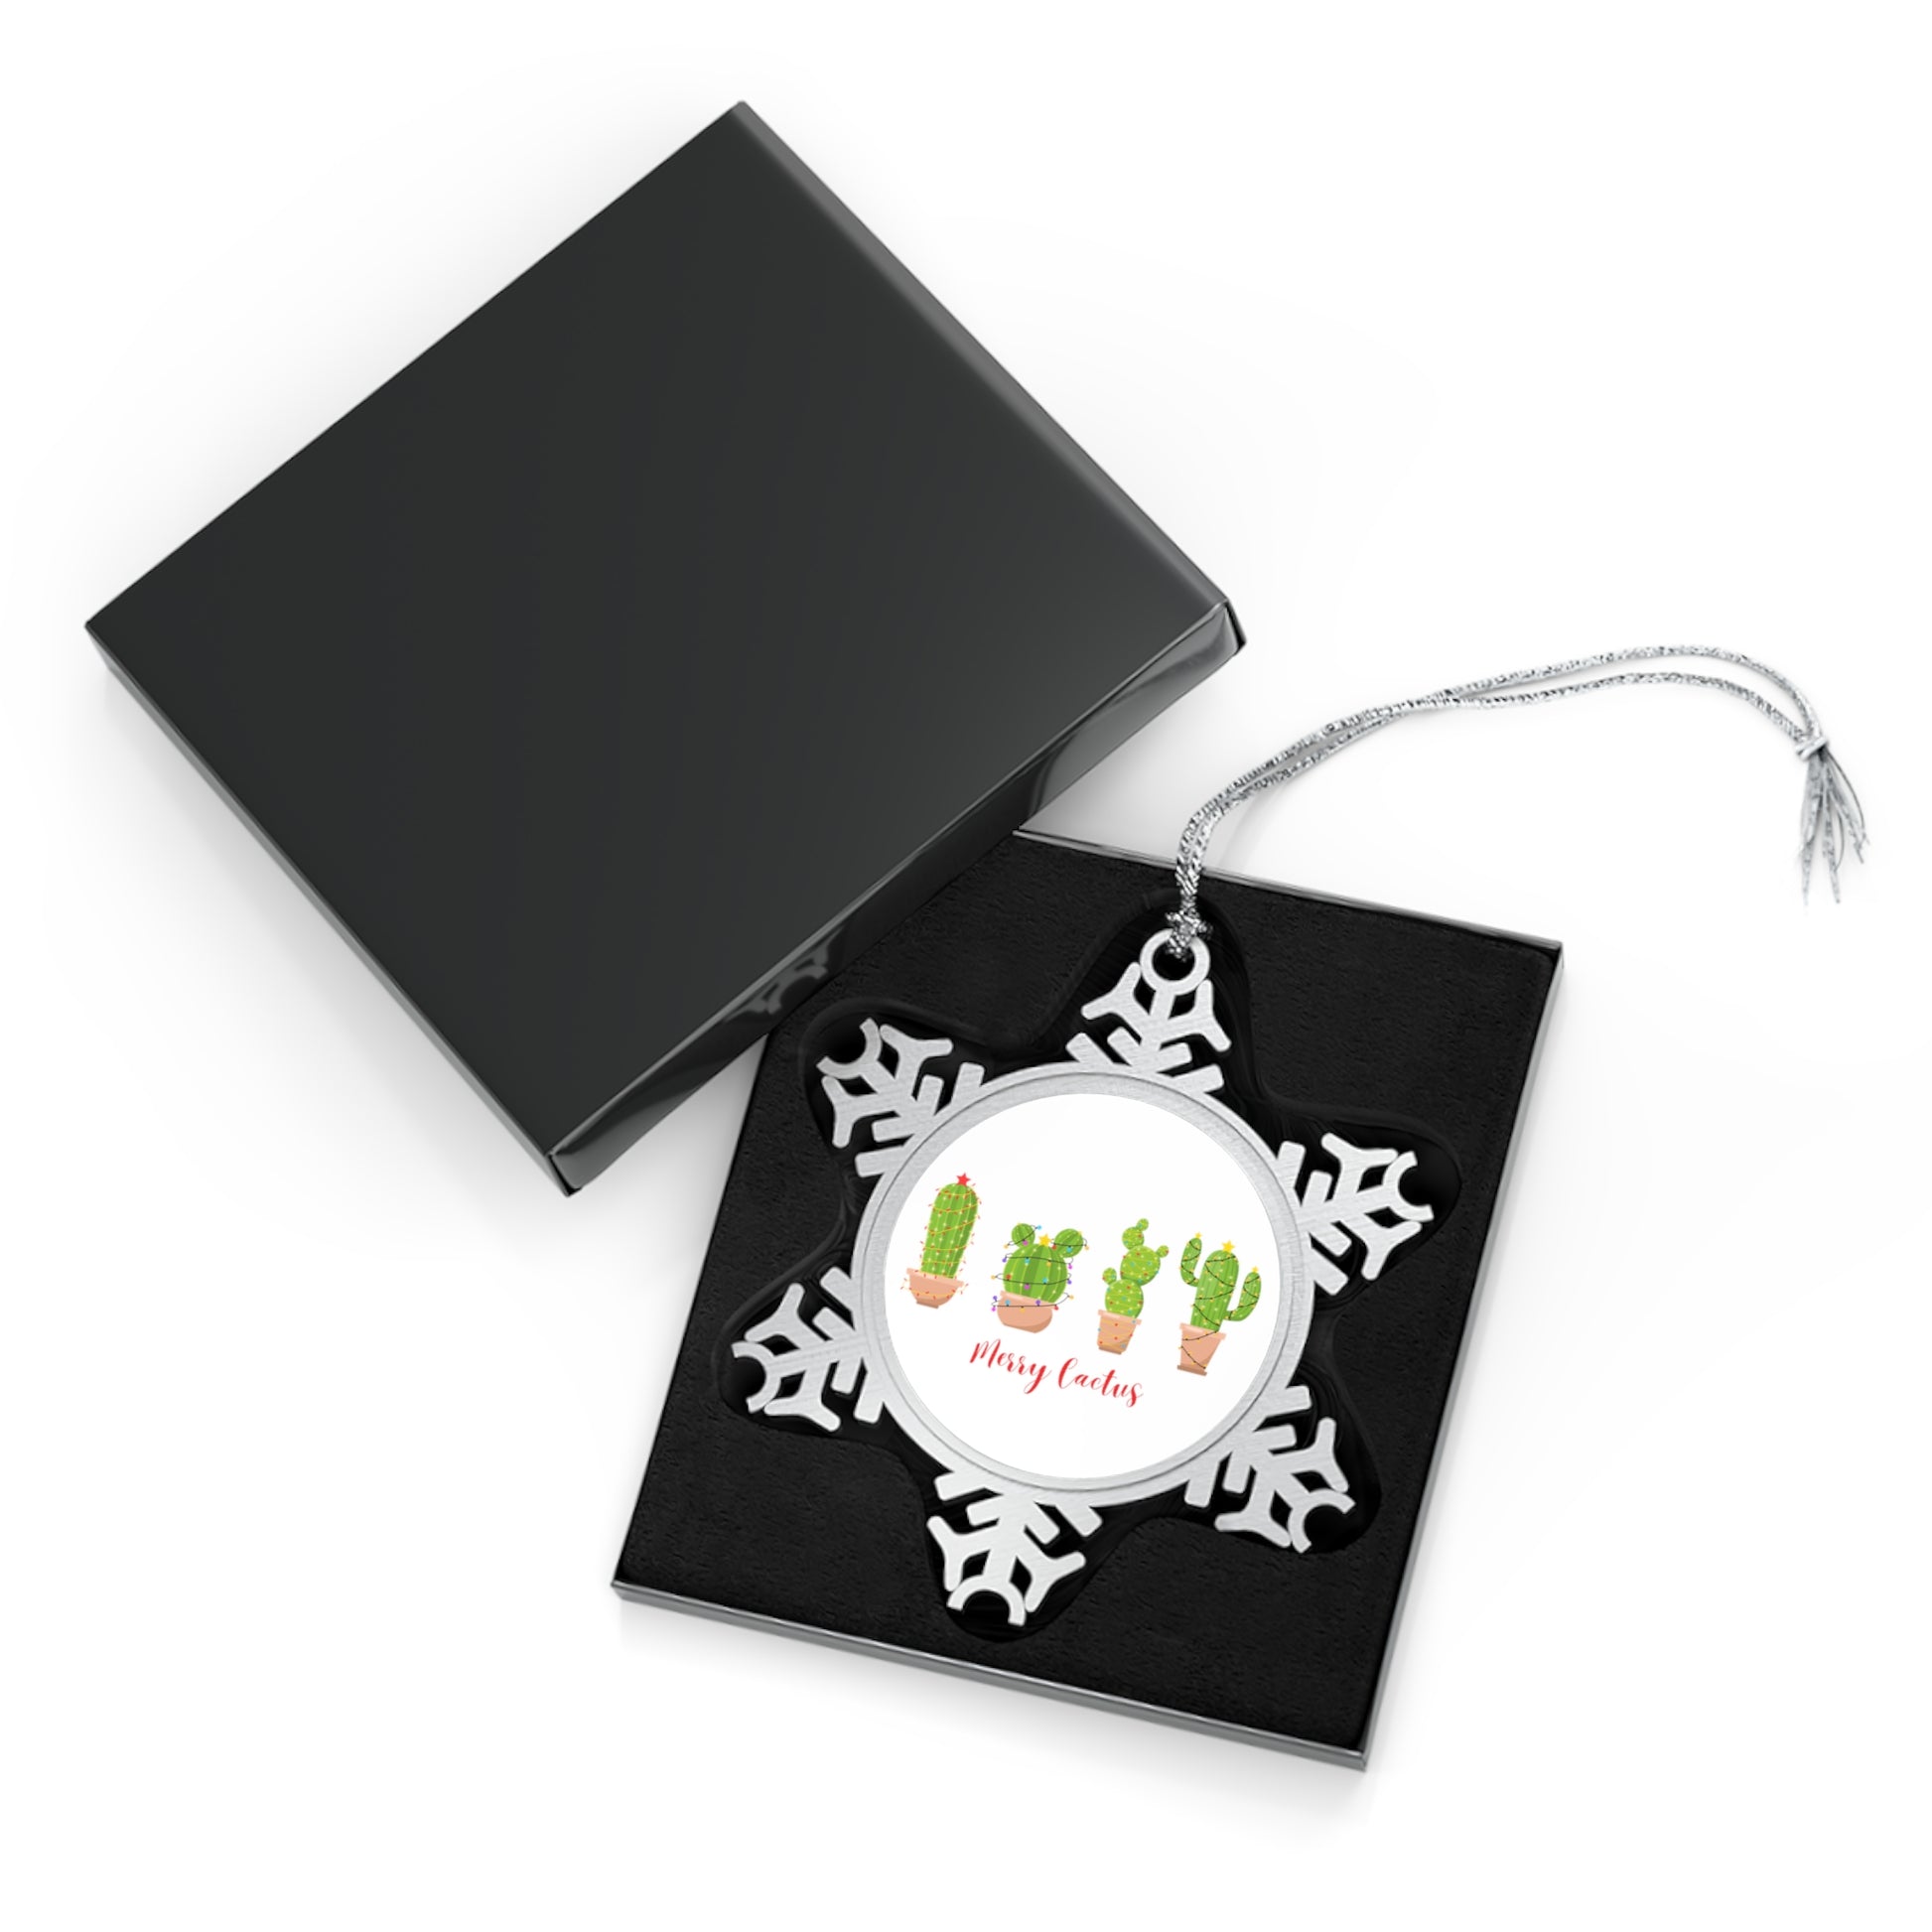 Merry Cactus - Pewter Snowflake Ornament Christmas Ornament